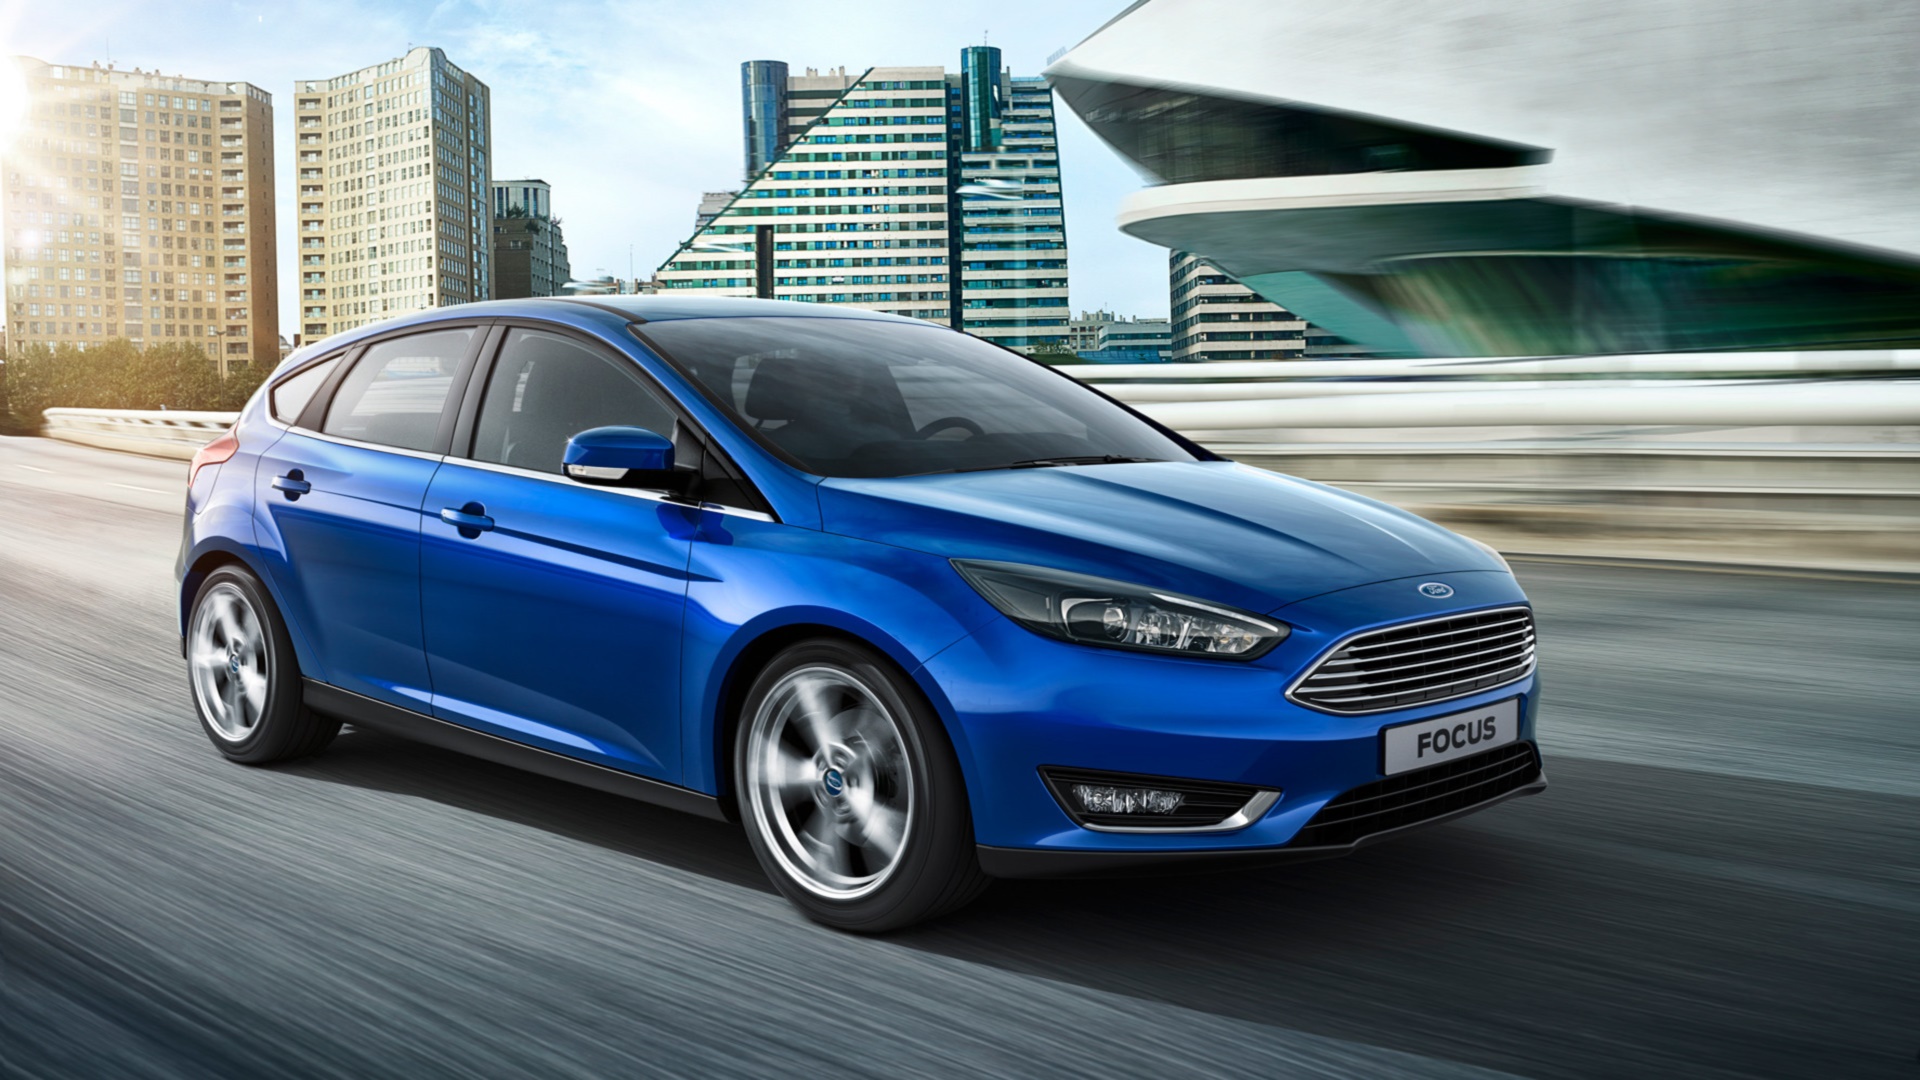 2015 Ford Focus Wagon Wallpapers